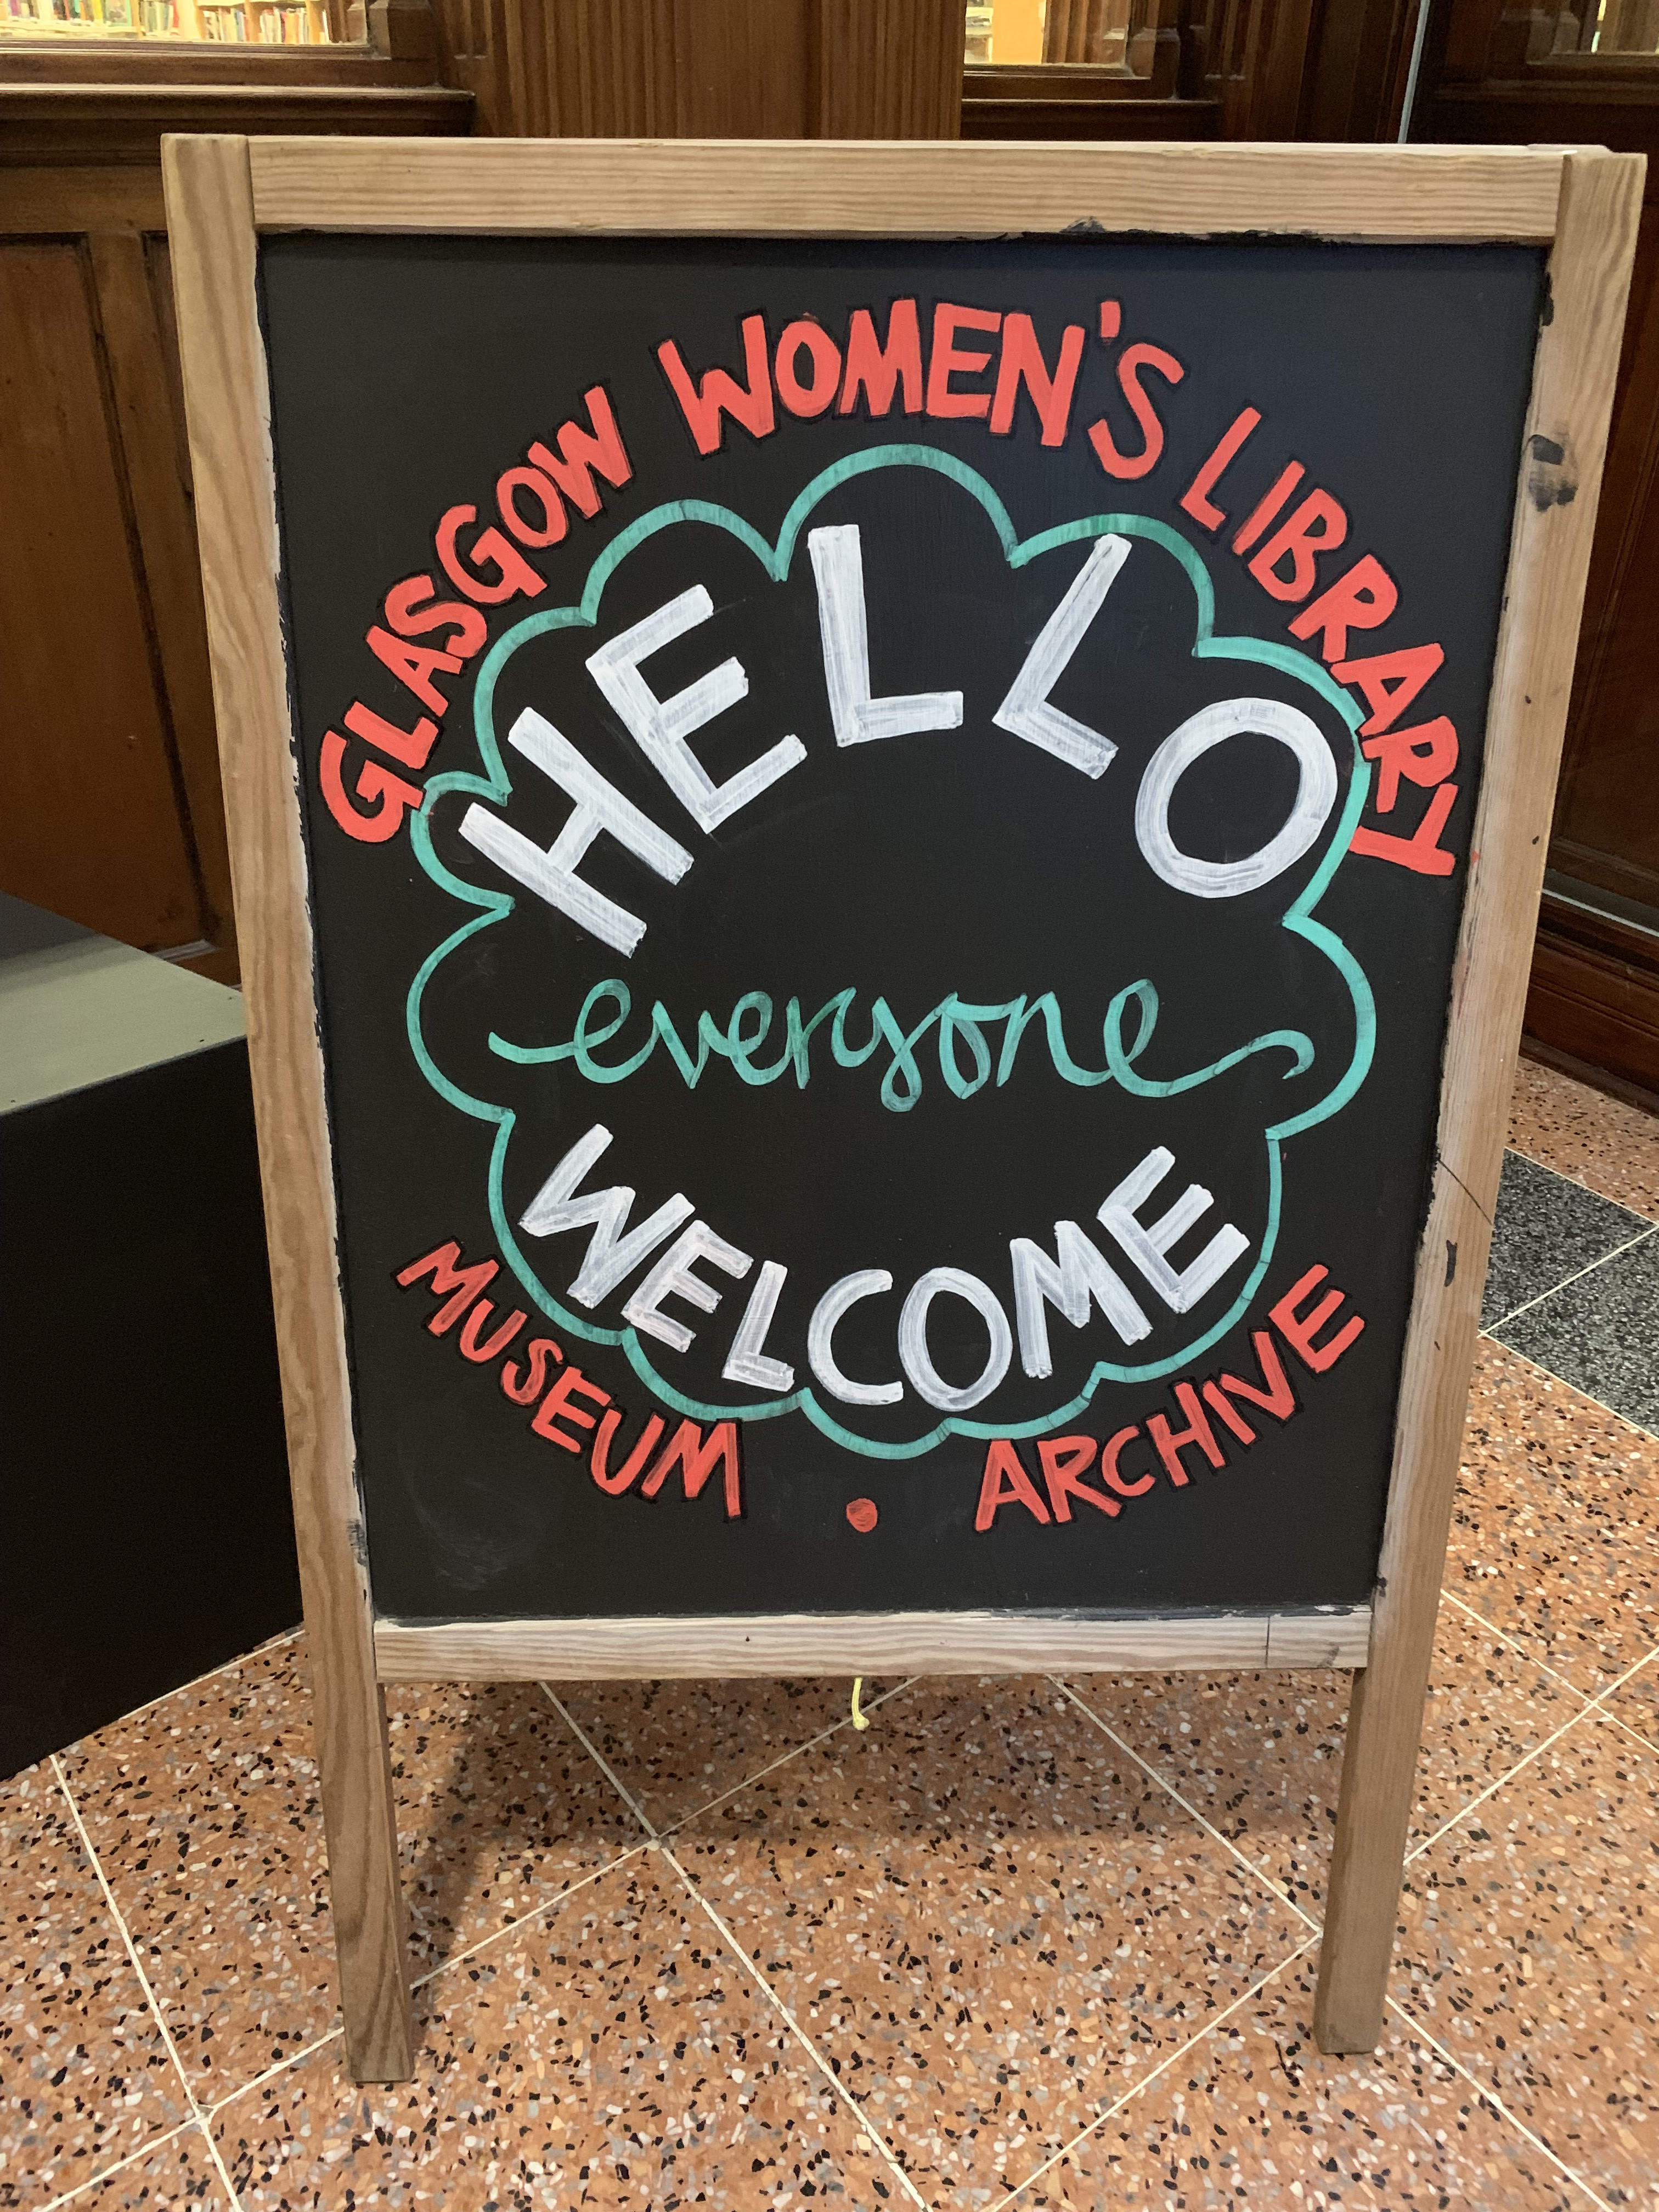 Glasgow Women's Library Poster